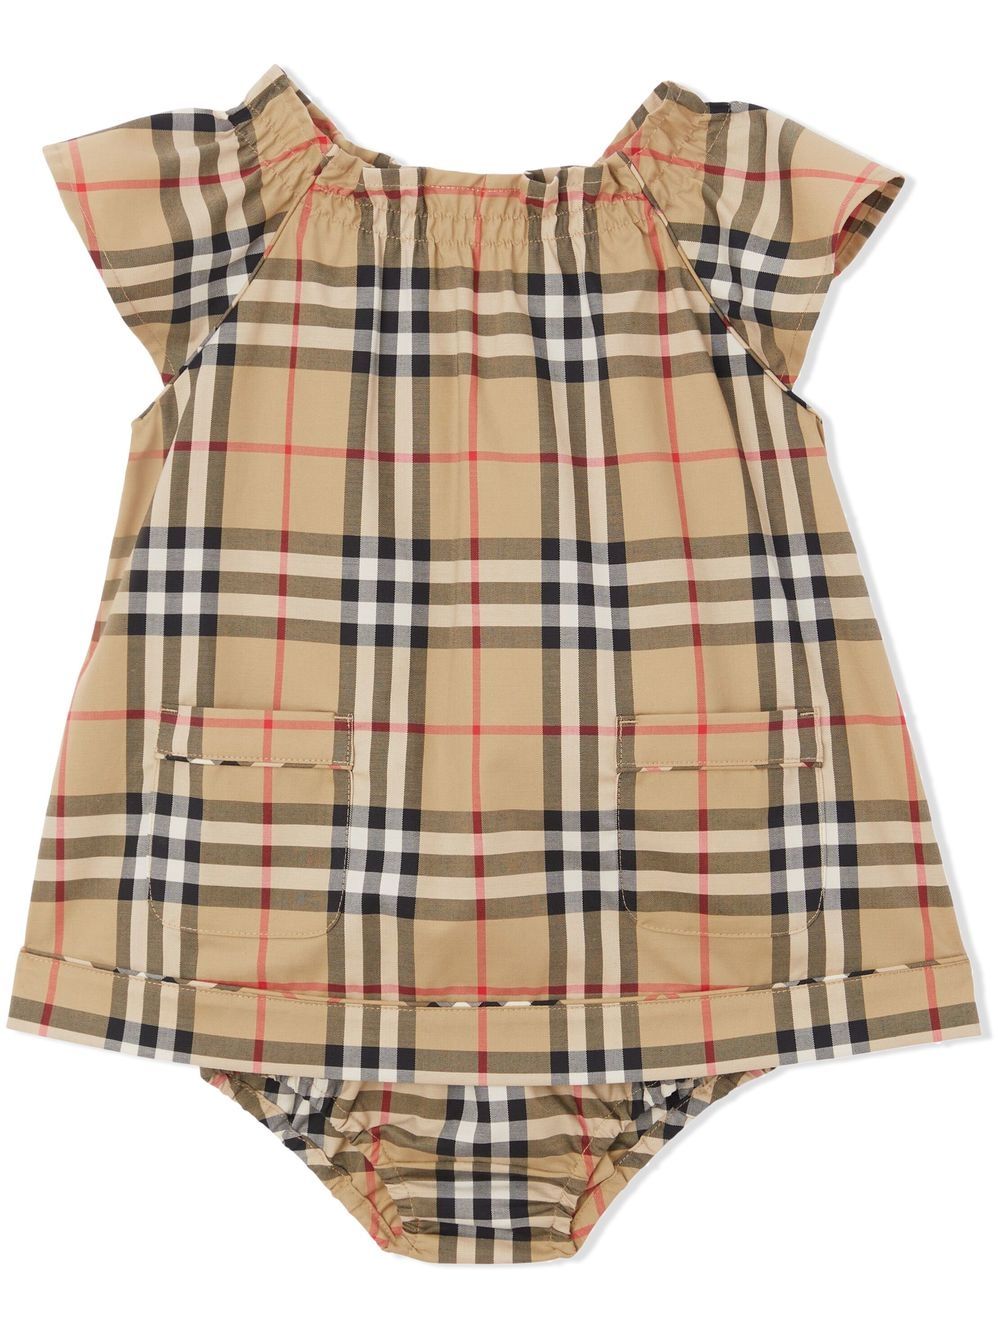 Vintage Check-print dress with bloomers